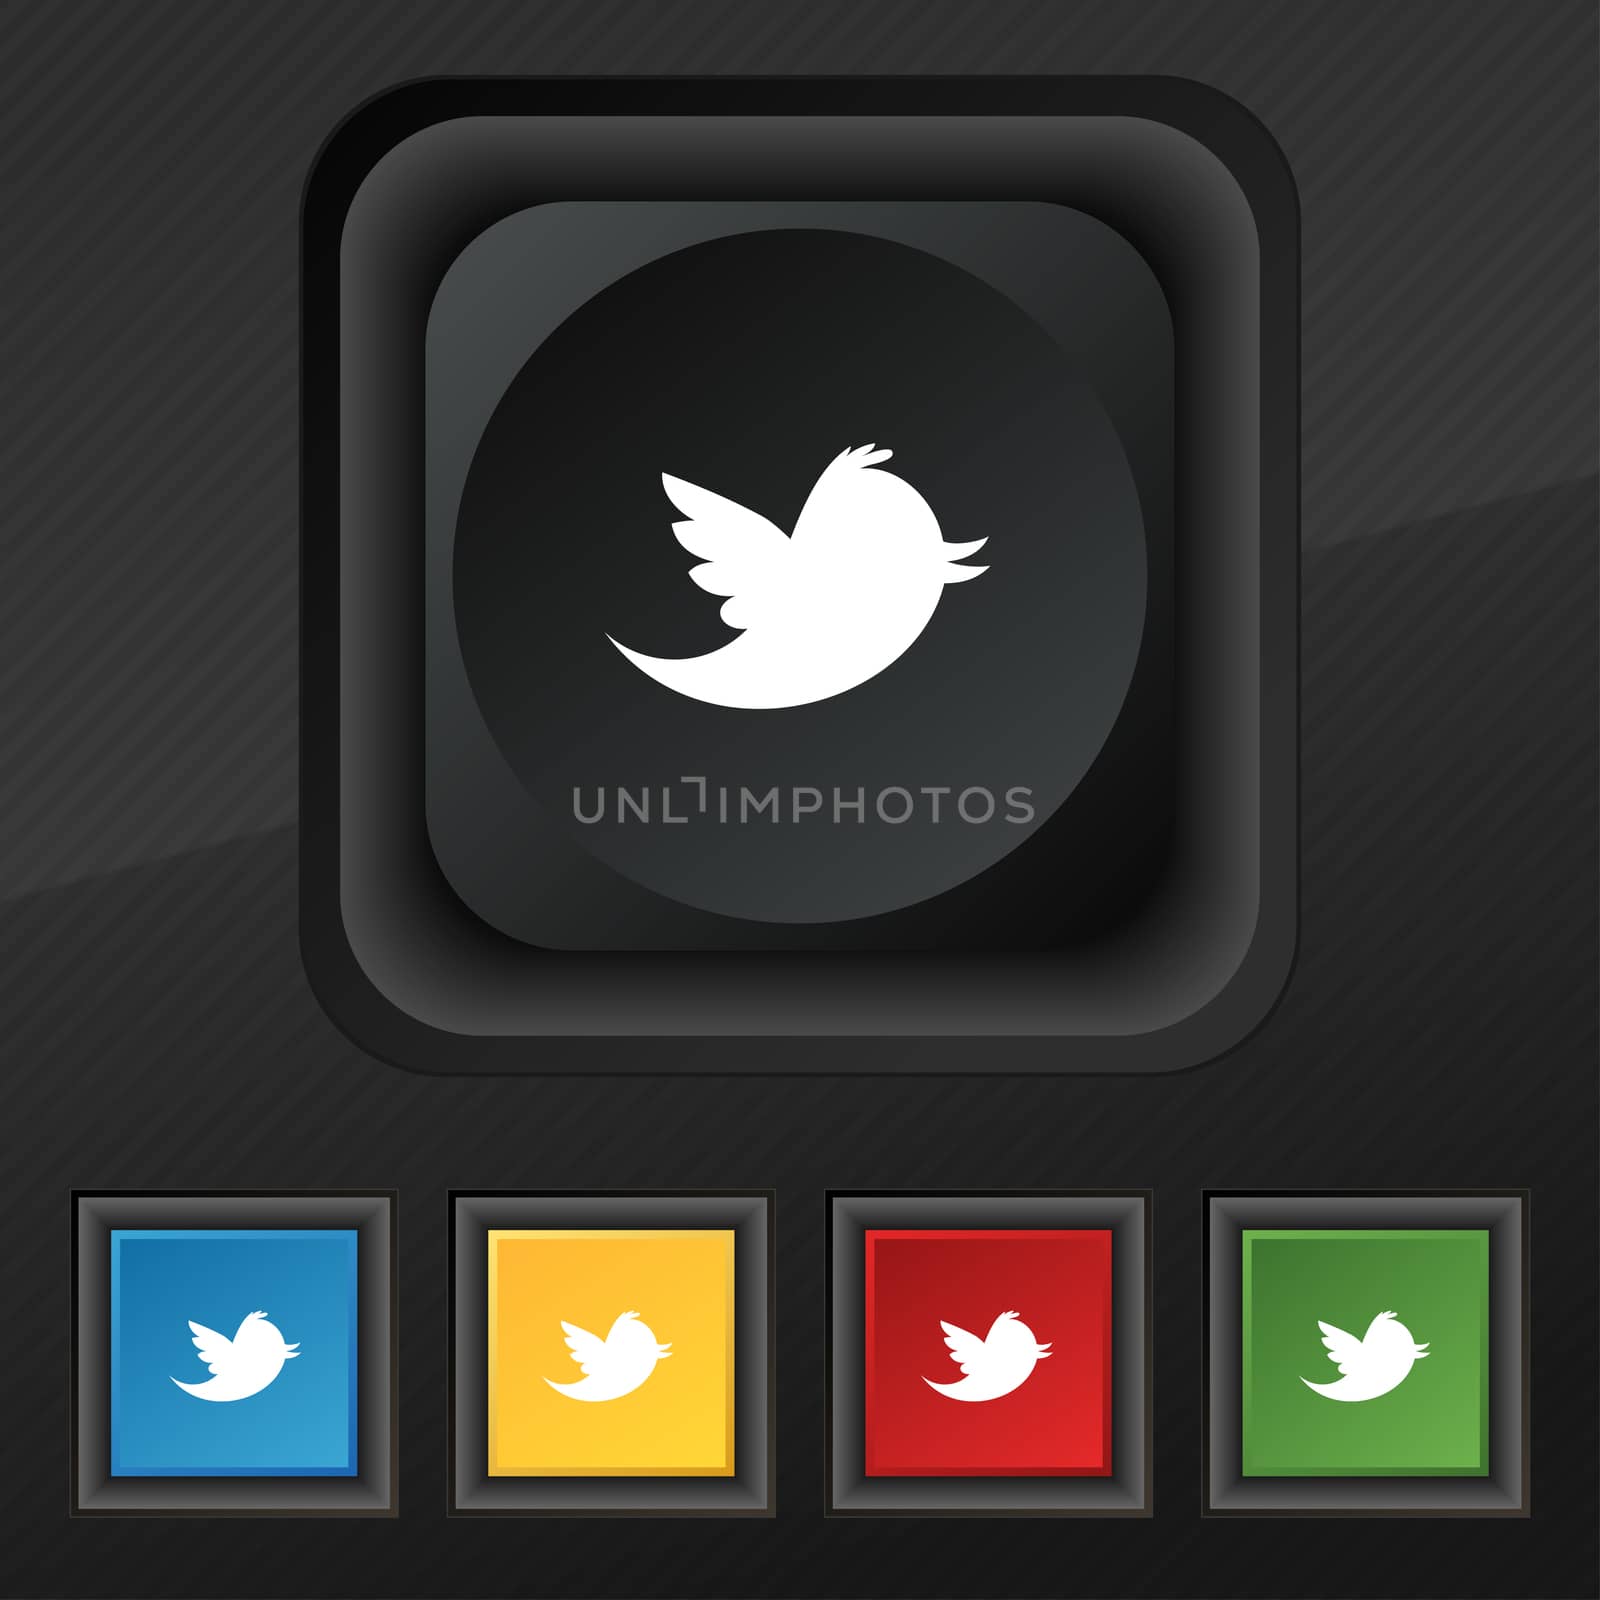 messages retweet icon symbol. Set of five colorful, stylish buttons on black texture for your design.  by serhii_lohvyniuk